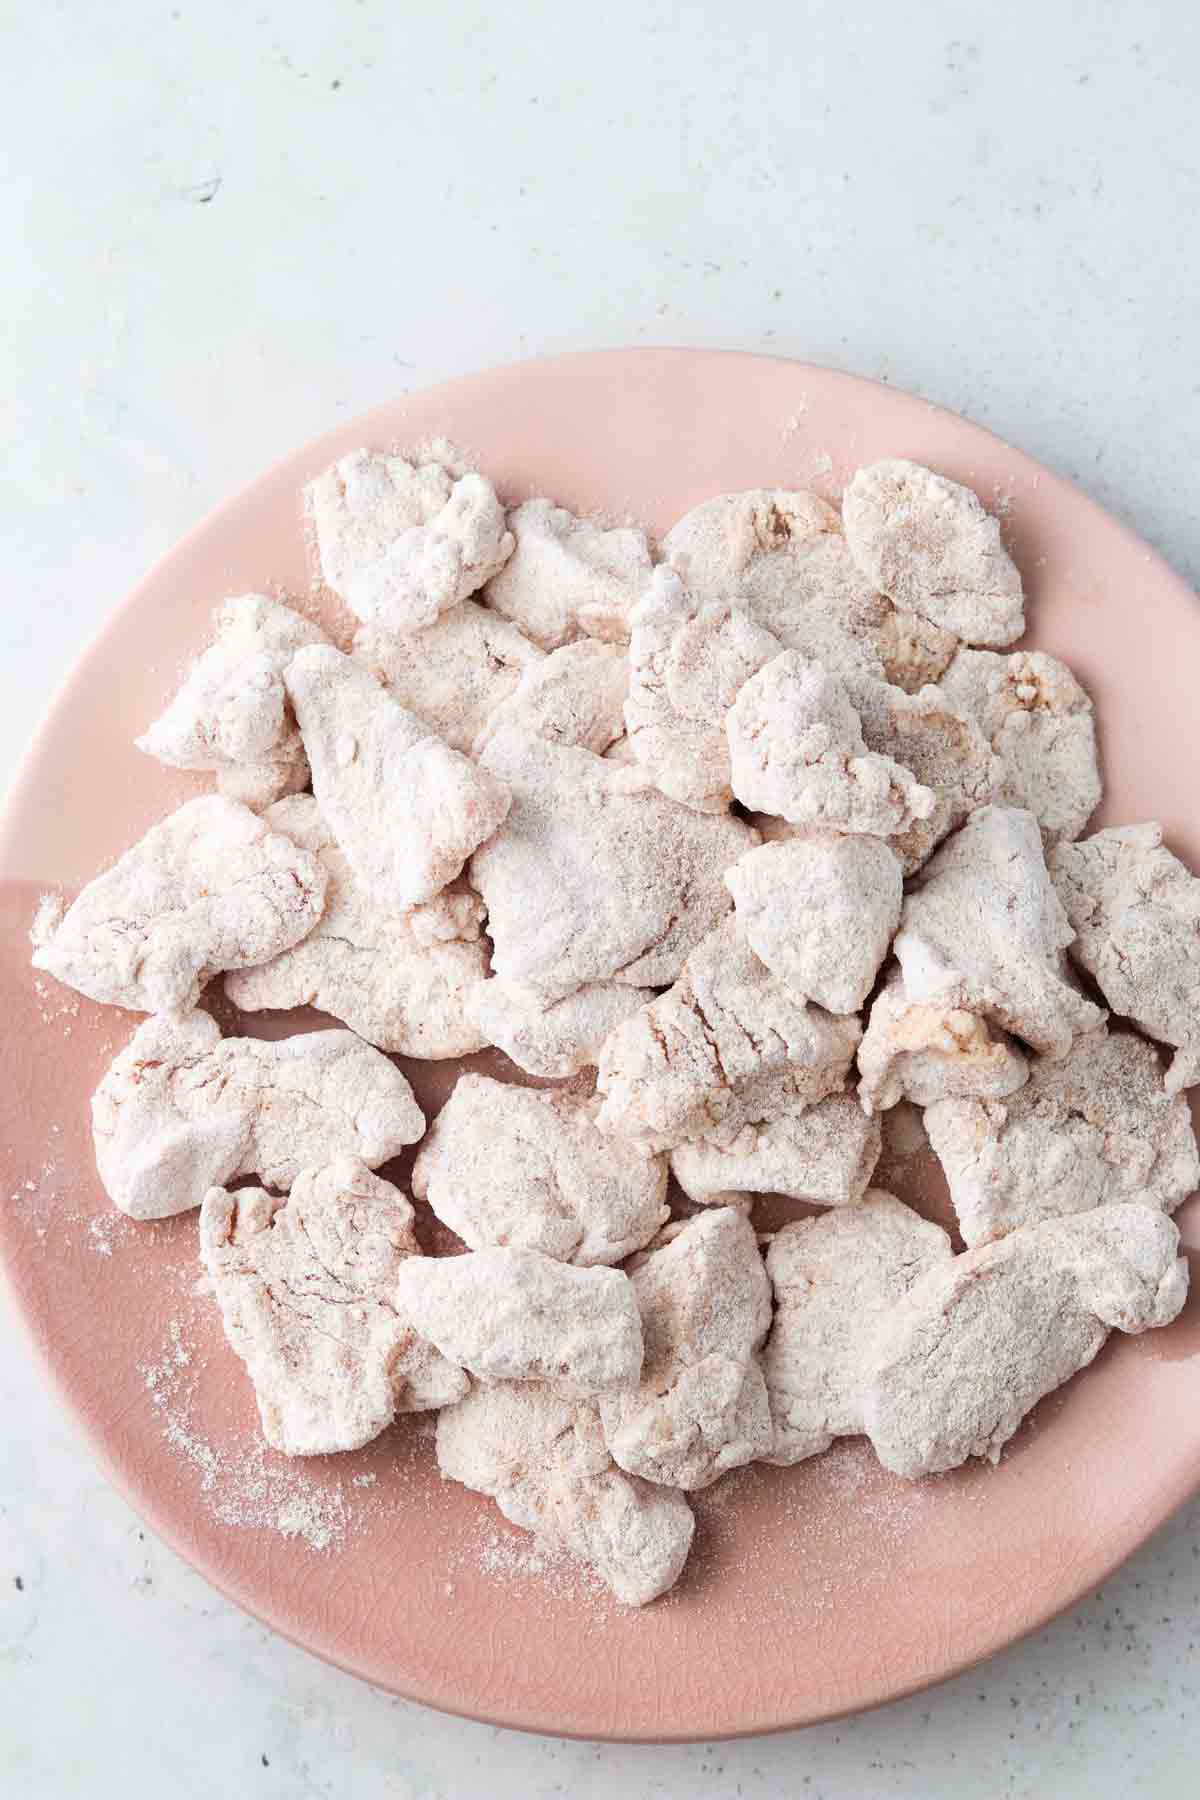 Cubbed chicken breast coated in flour on a pink plate.